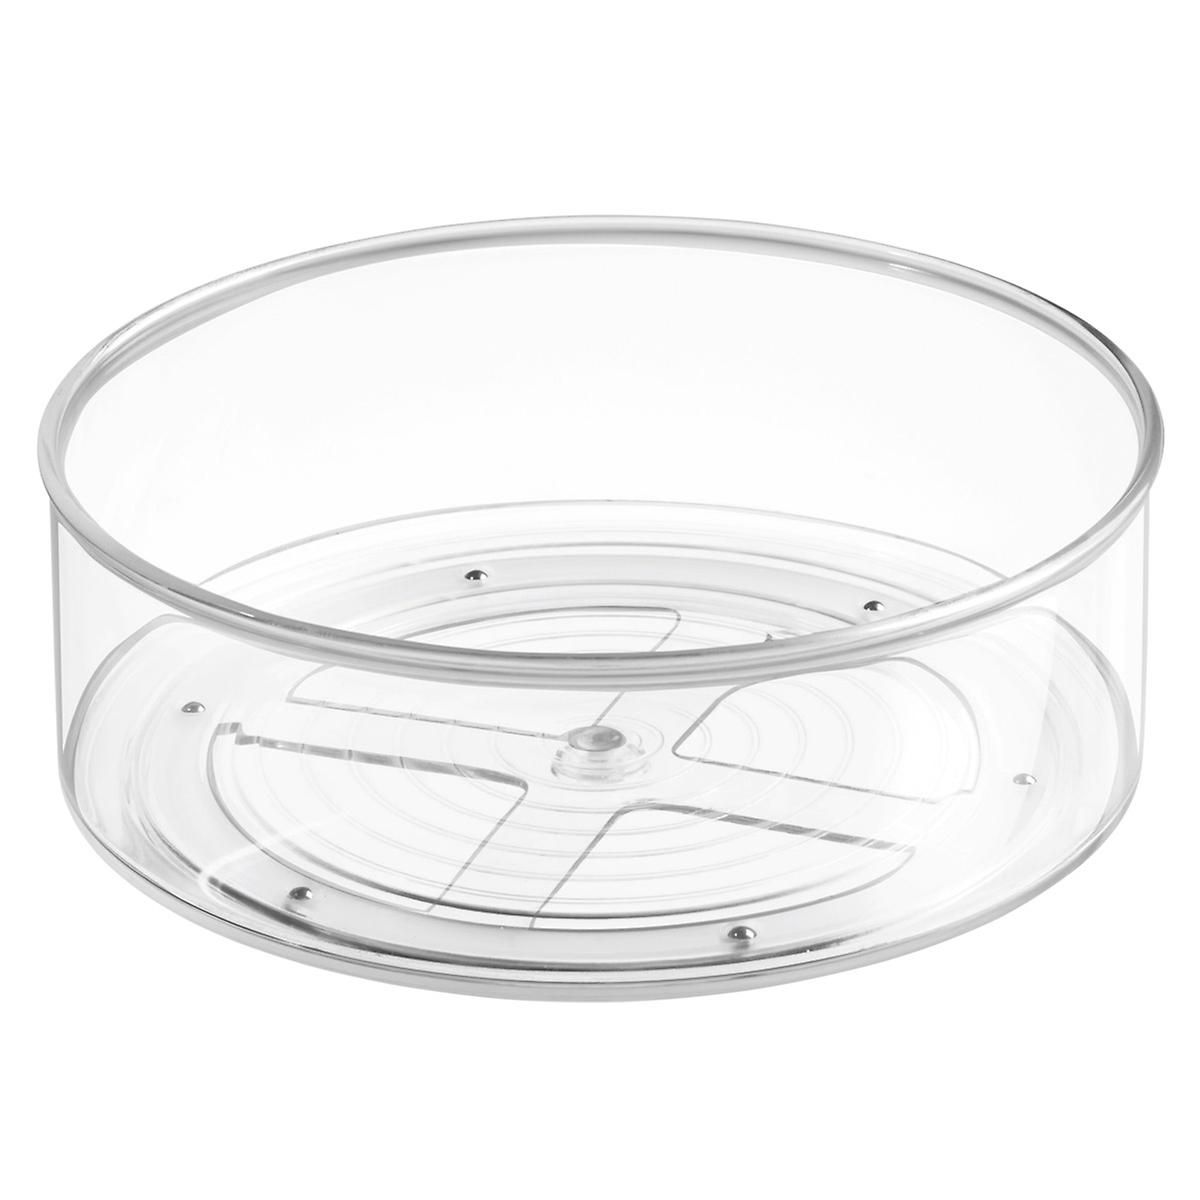 iDESIGN Linus Deep Turntable Clear | The Container Store